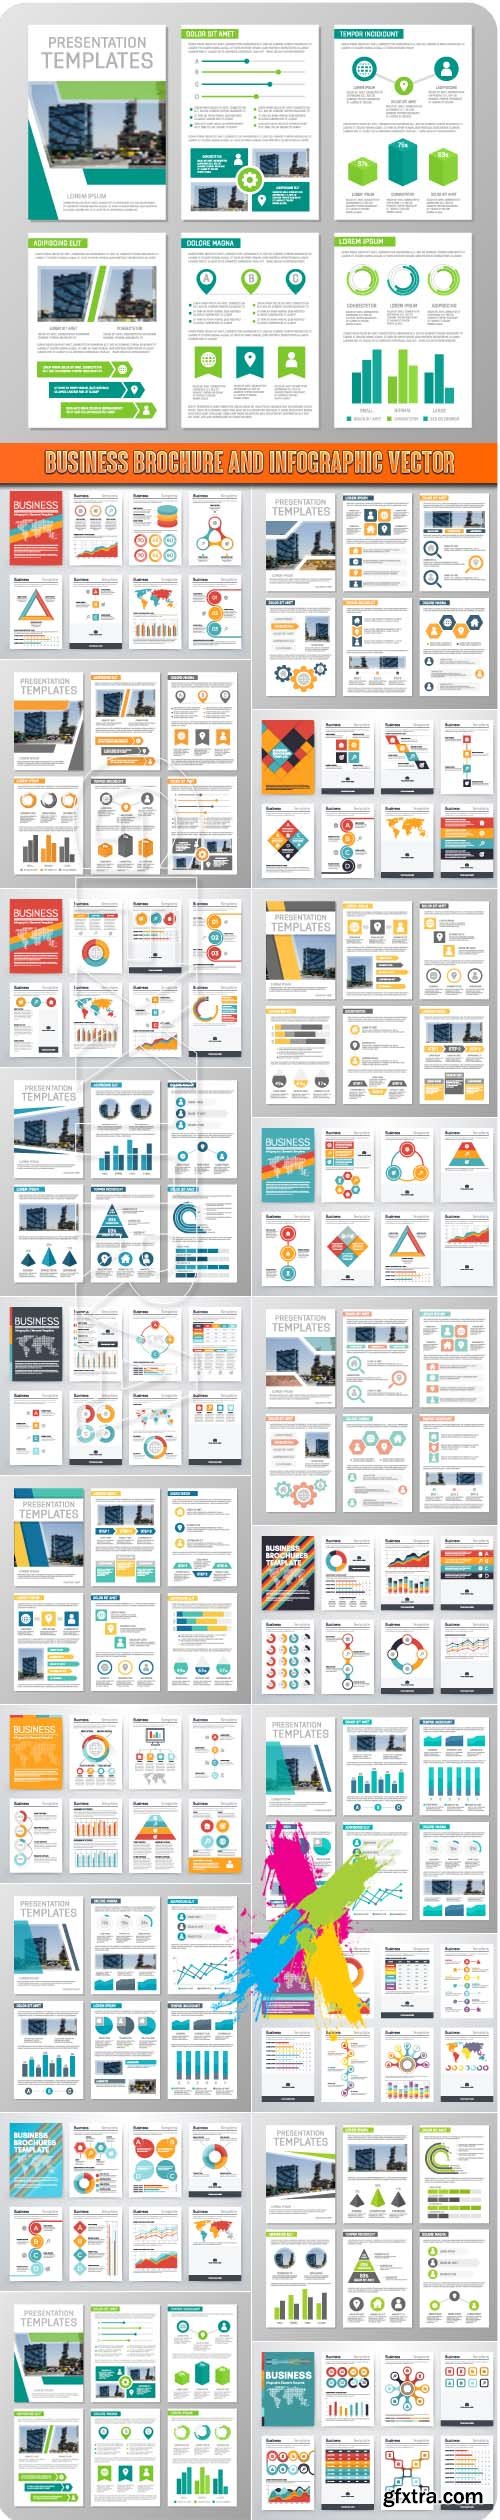 Business Brochure and Infographic vector